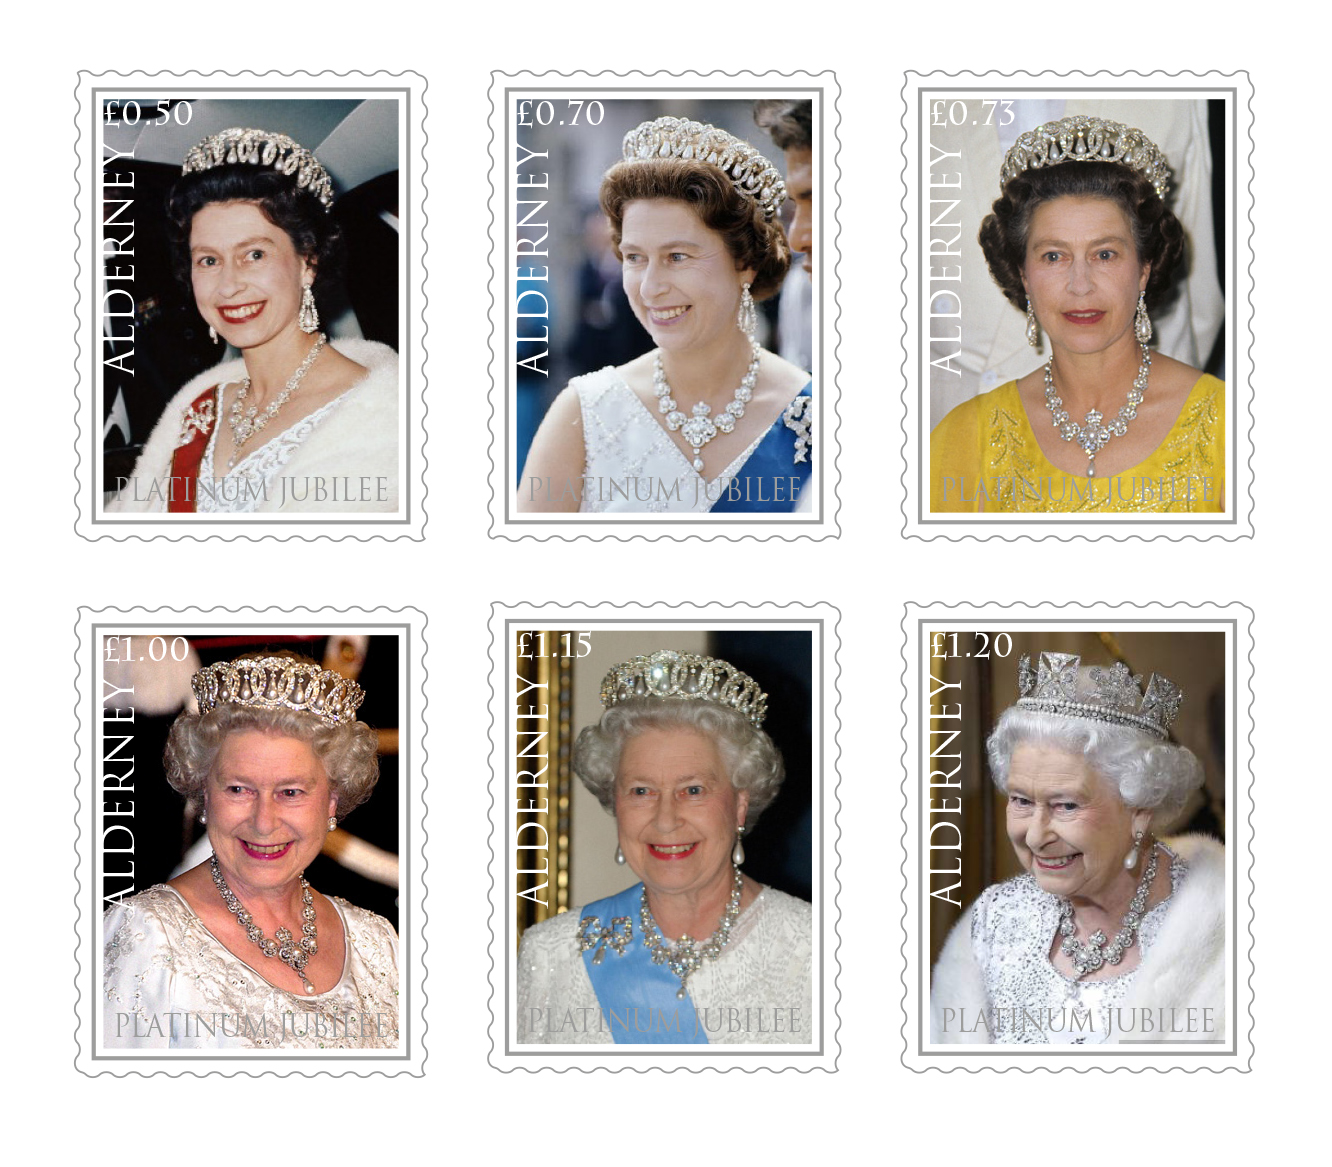 Philatelic first for Guernsey Post with Platinum Jubilee stamps